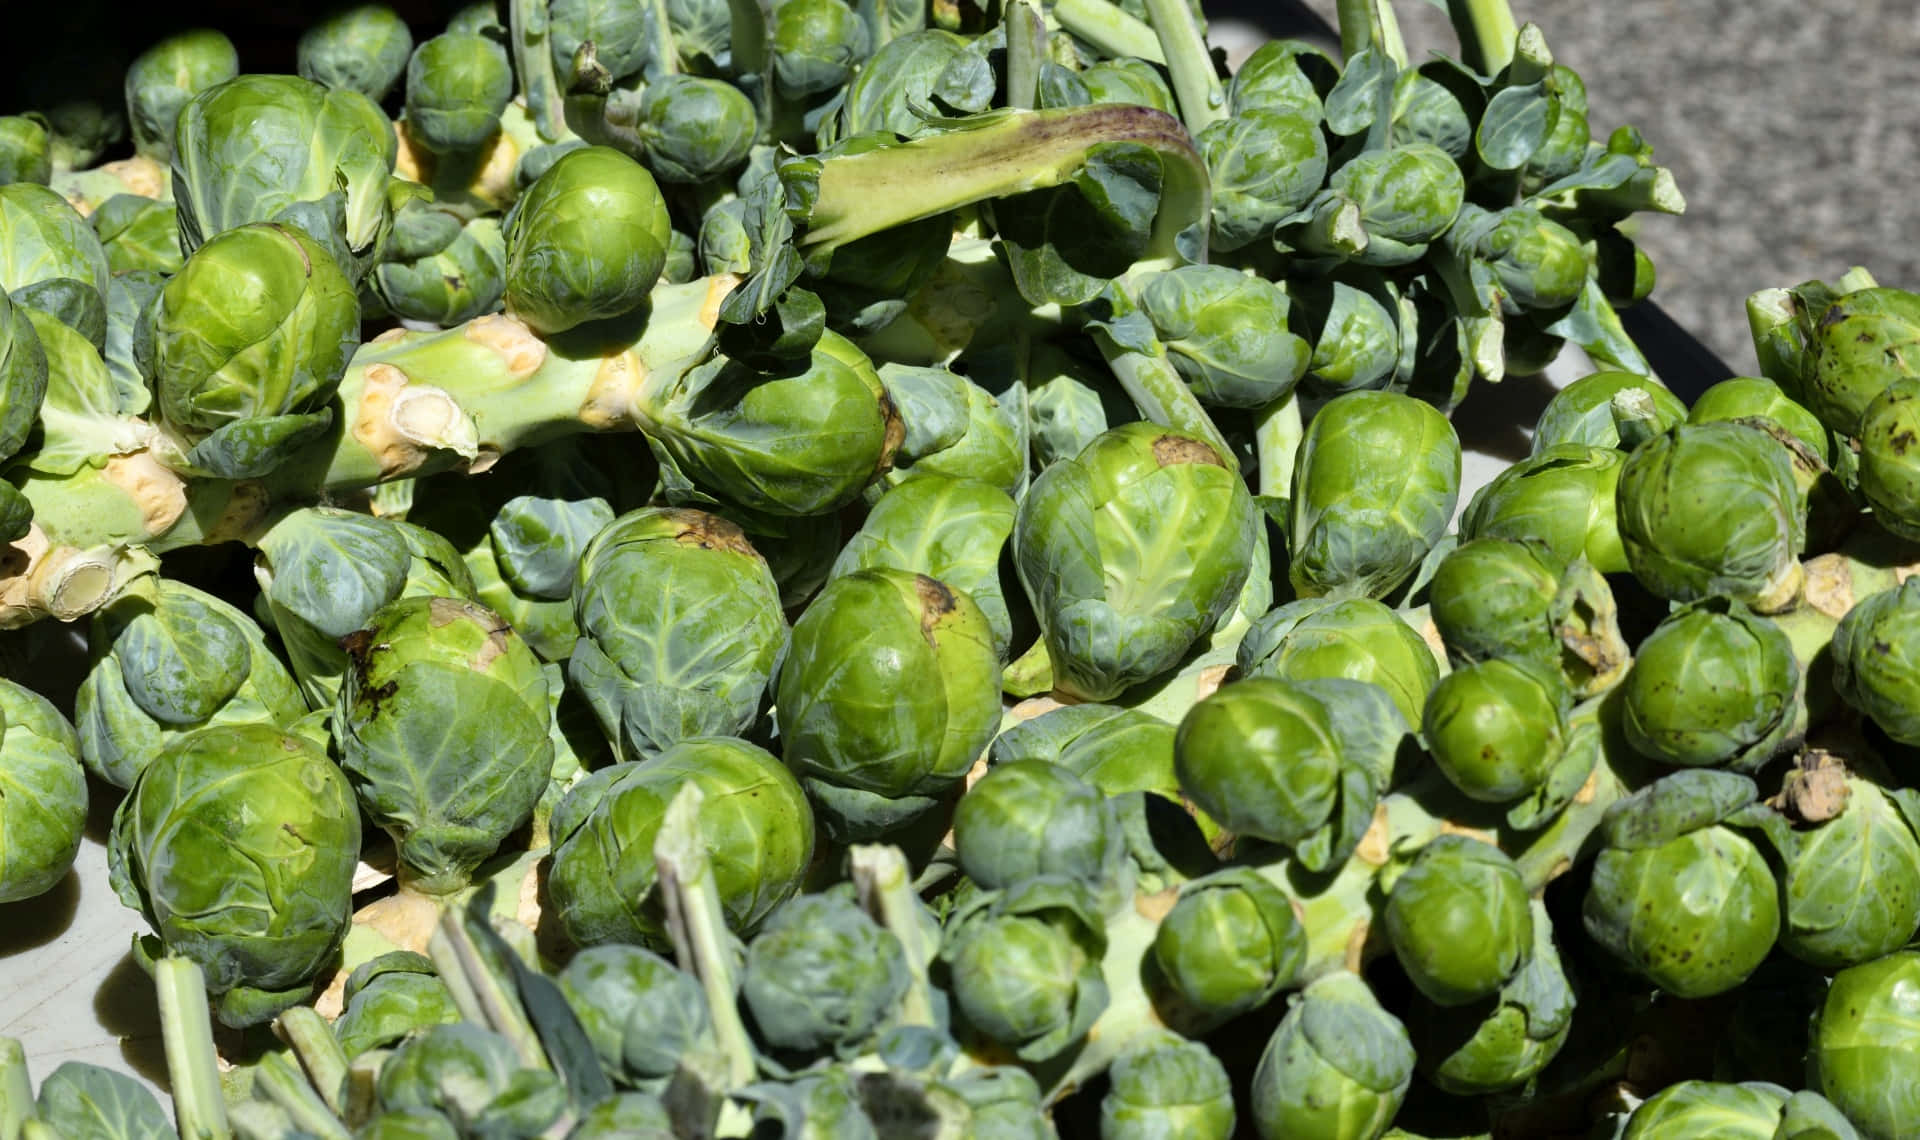 Delicious, crunchy, and packed full of nutrition - it's no wonder why Brussel Sprouts are so popular!